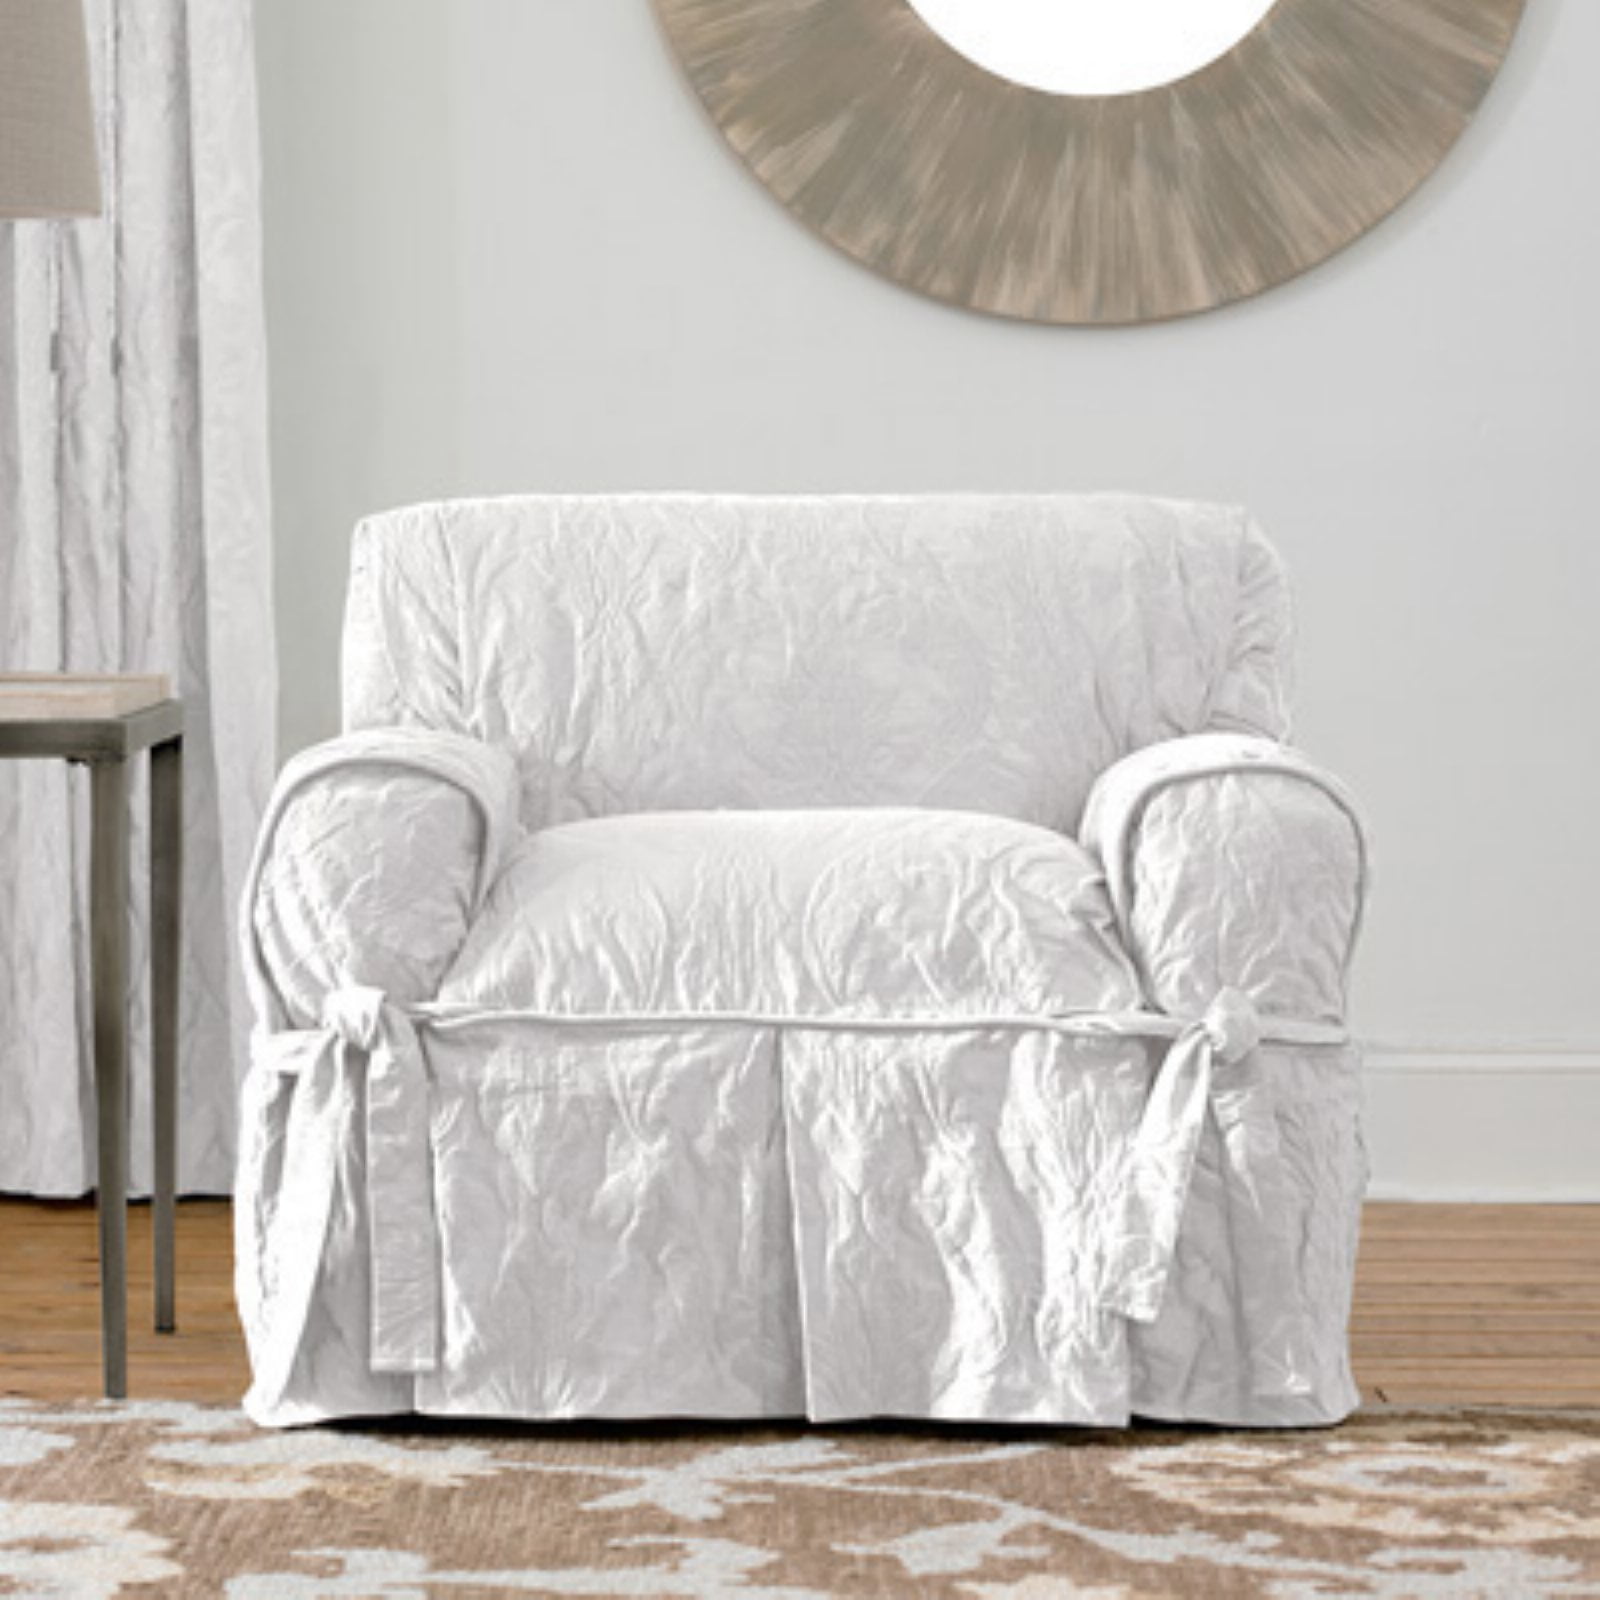 Sure Fit Matelasse Damask Chair Cover, Sure Fit Matelasse Damask Arm Long Dining Room Chair Cover